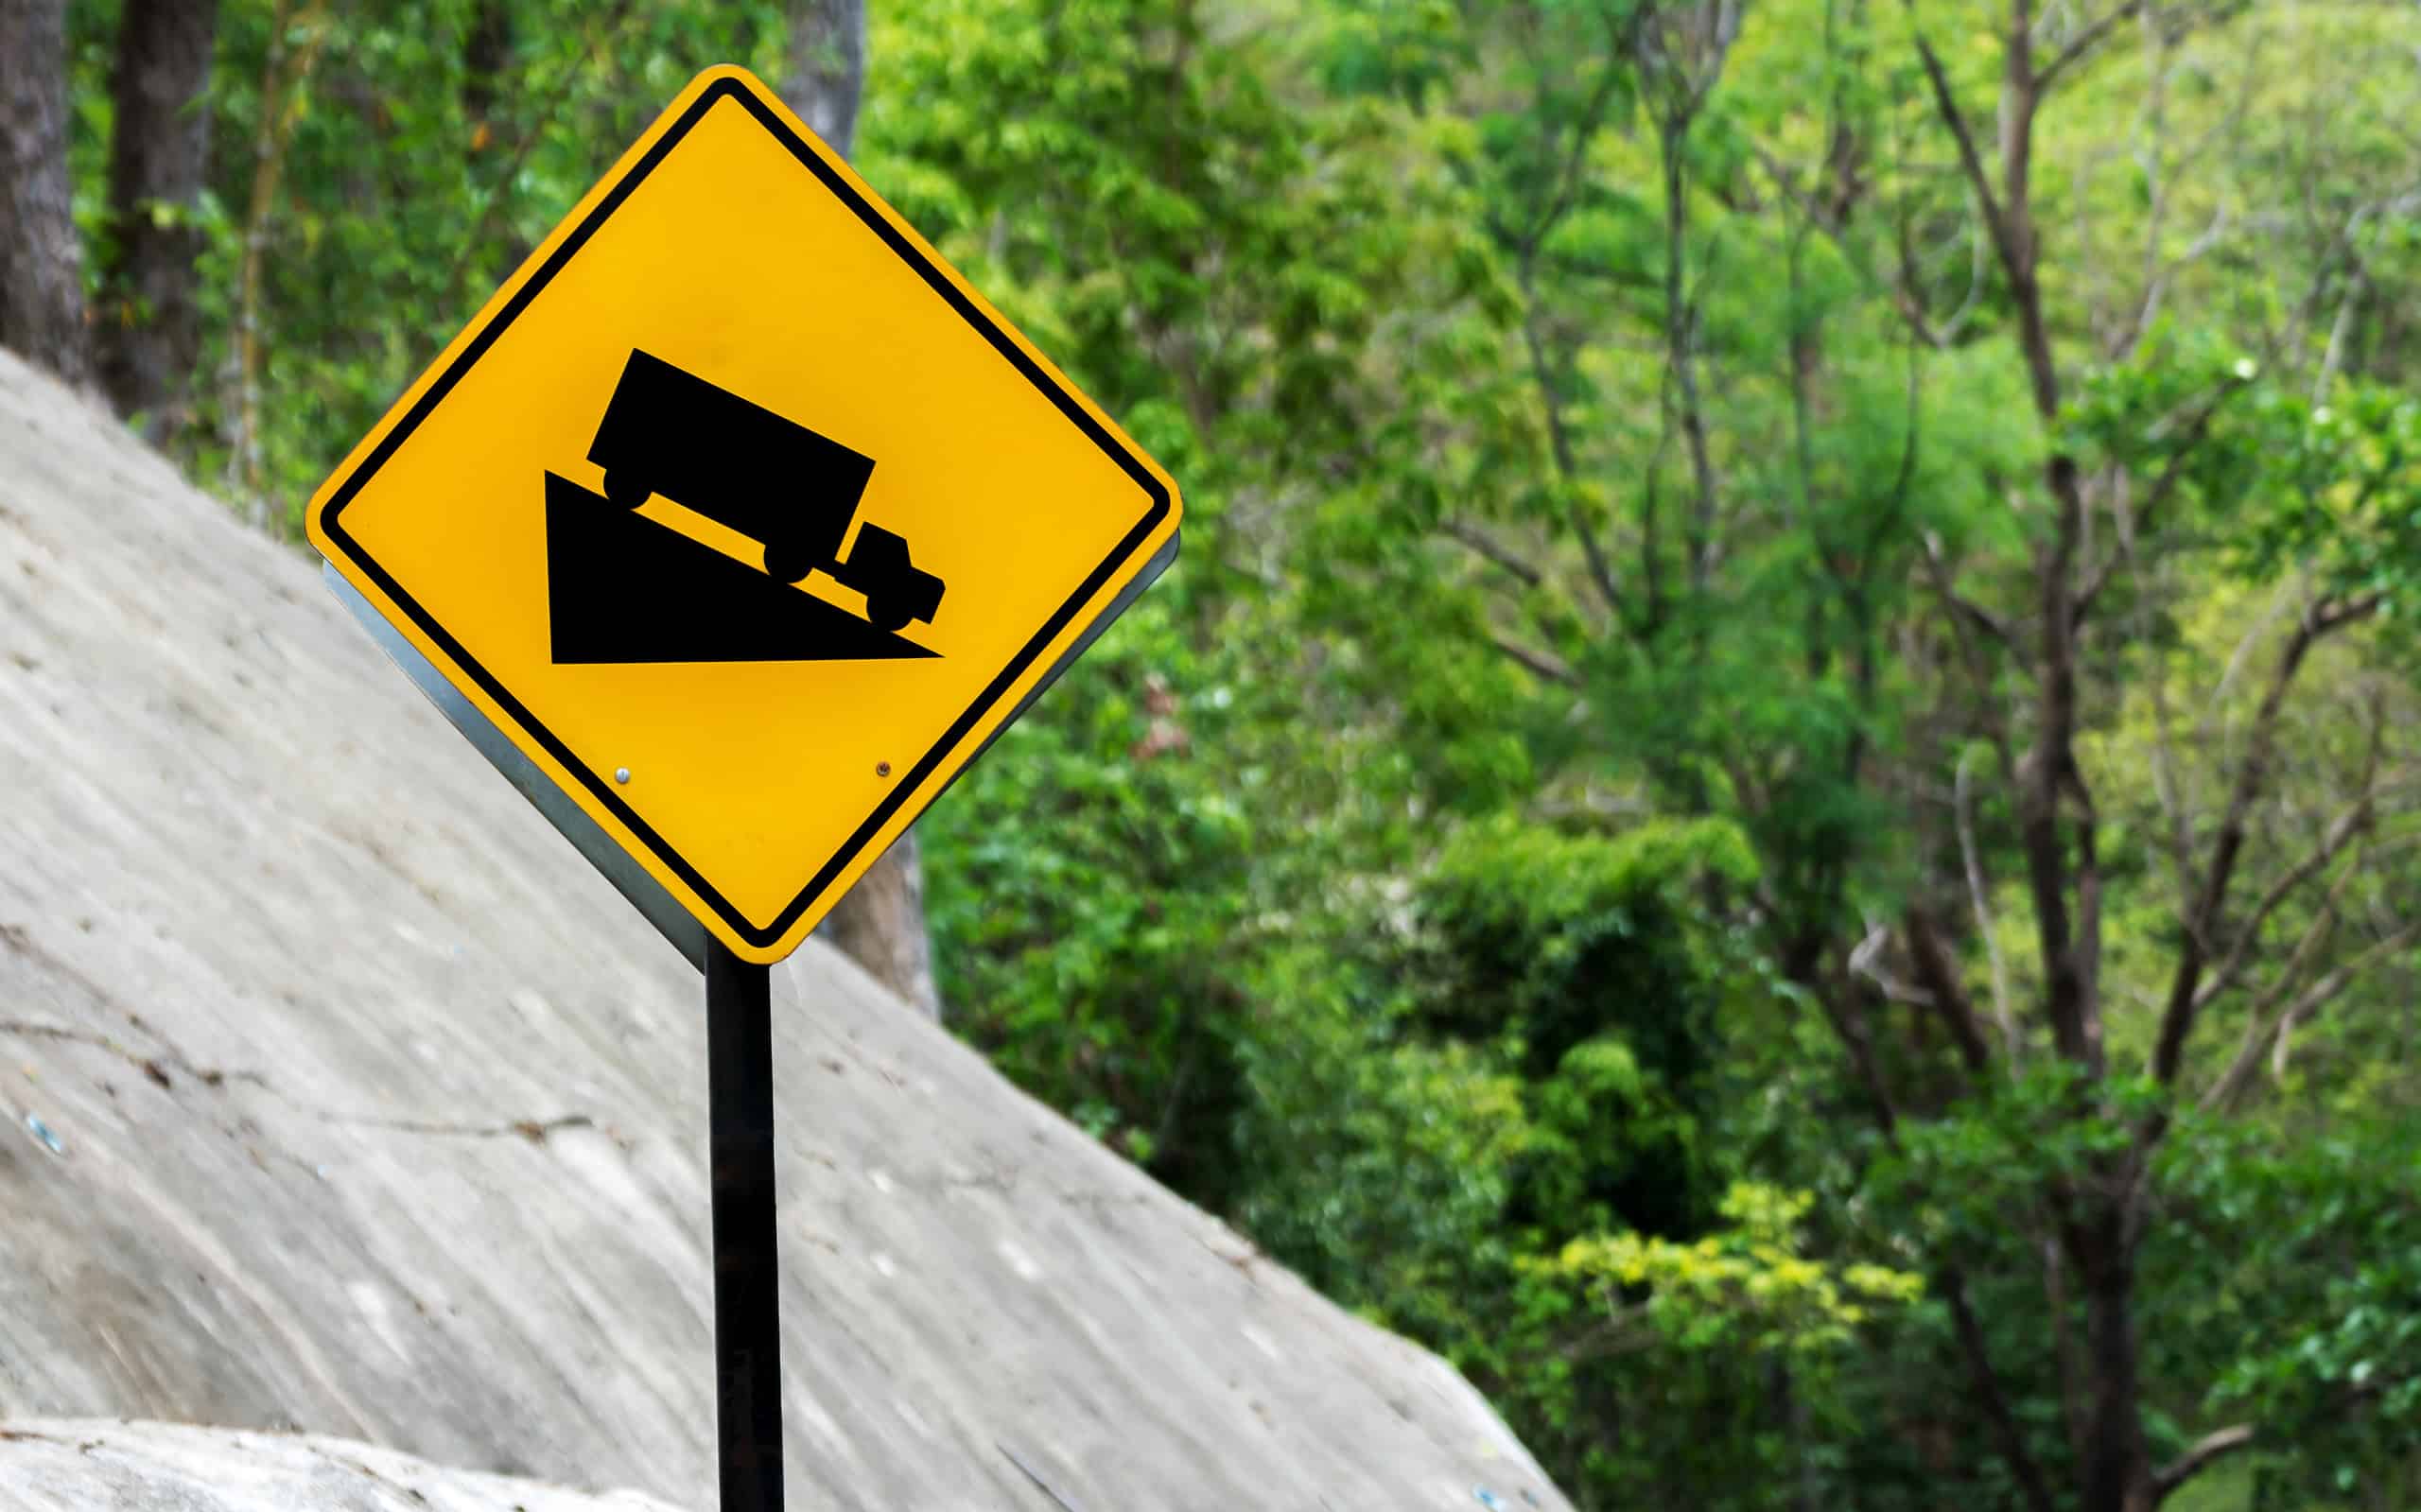 What Does Road Grade Mean? 7 Things to Watch for When Driving Steep Roads -  Mortons on the Move